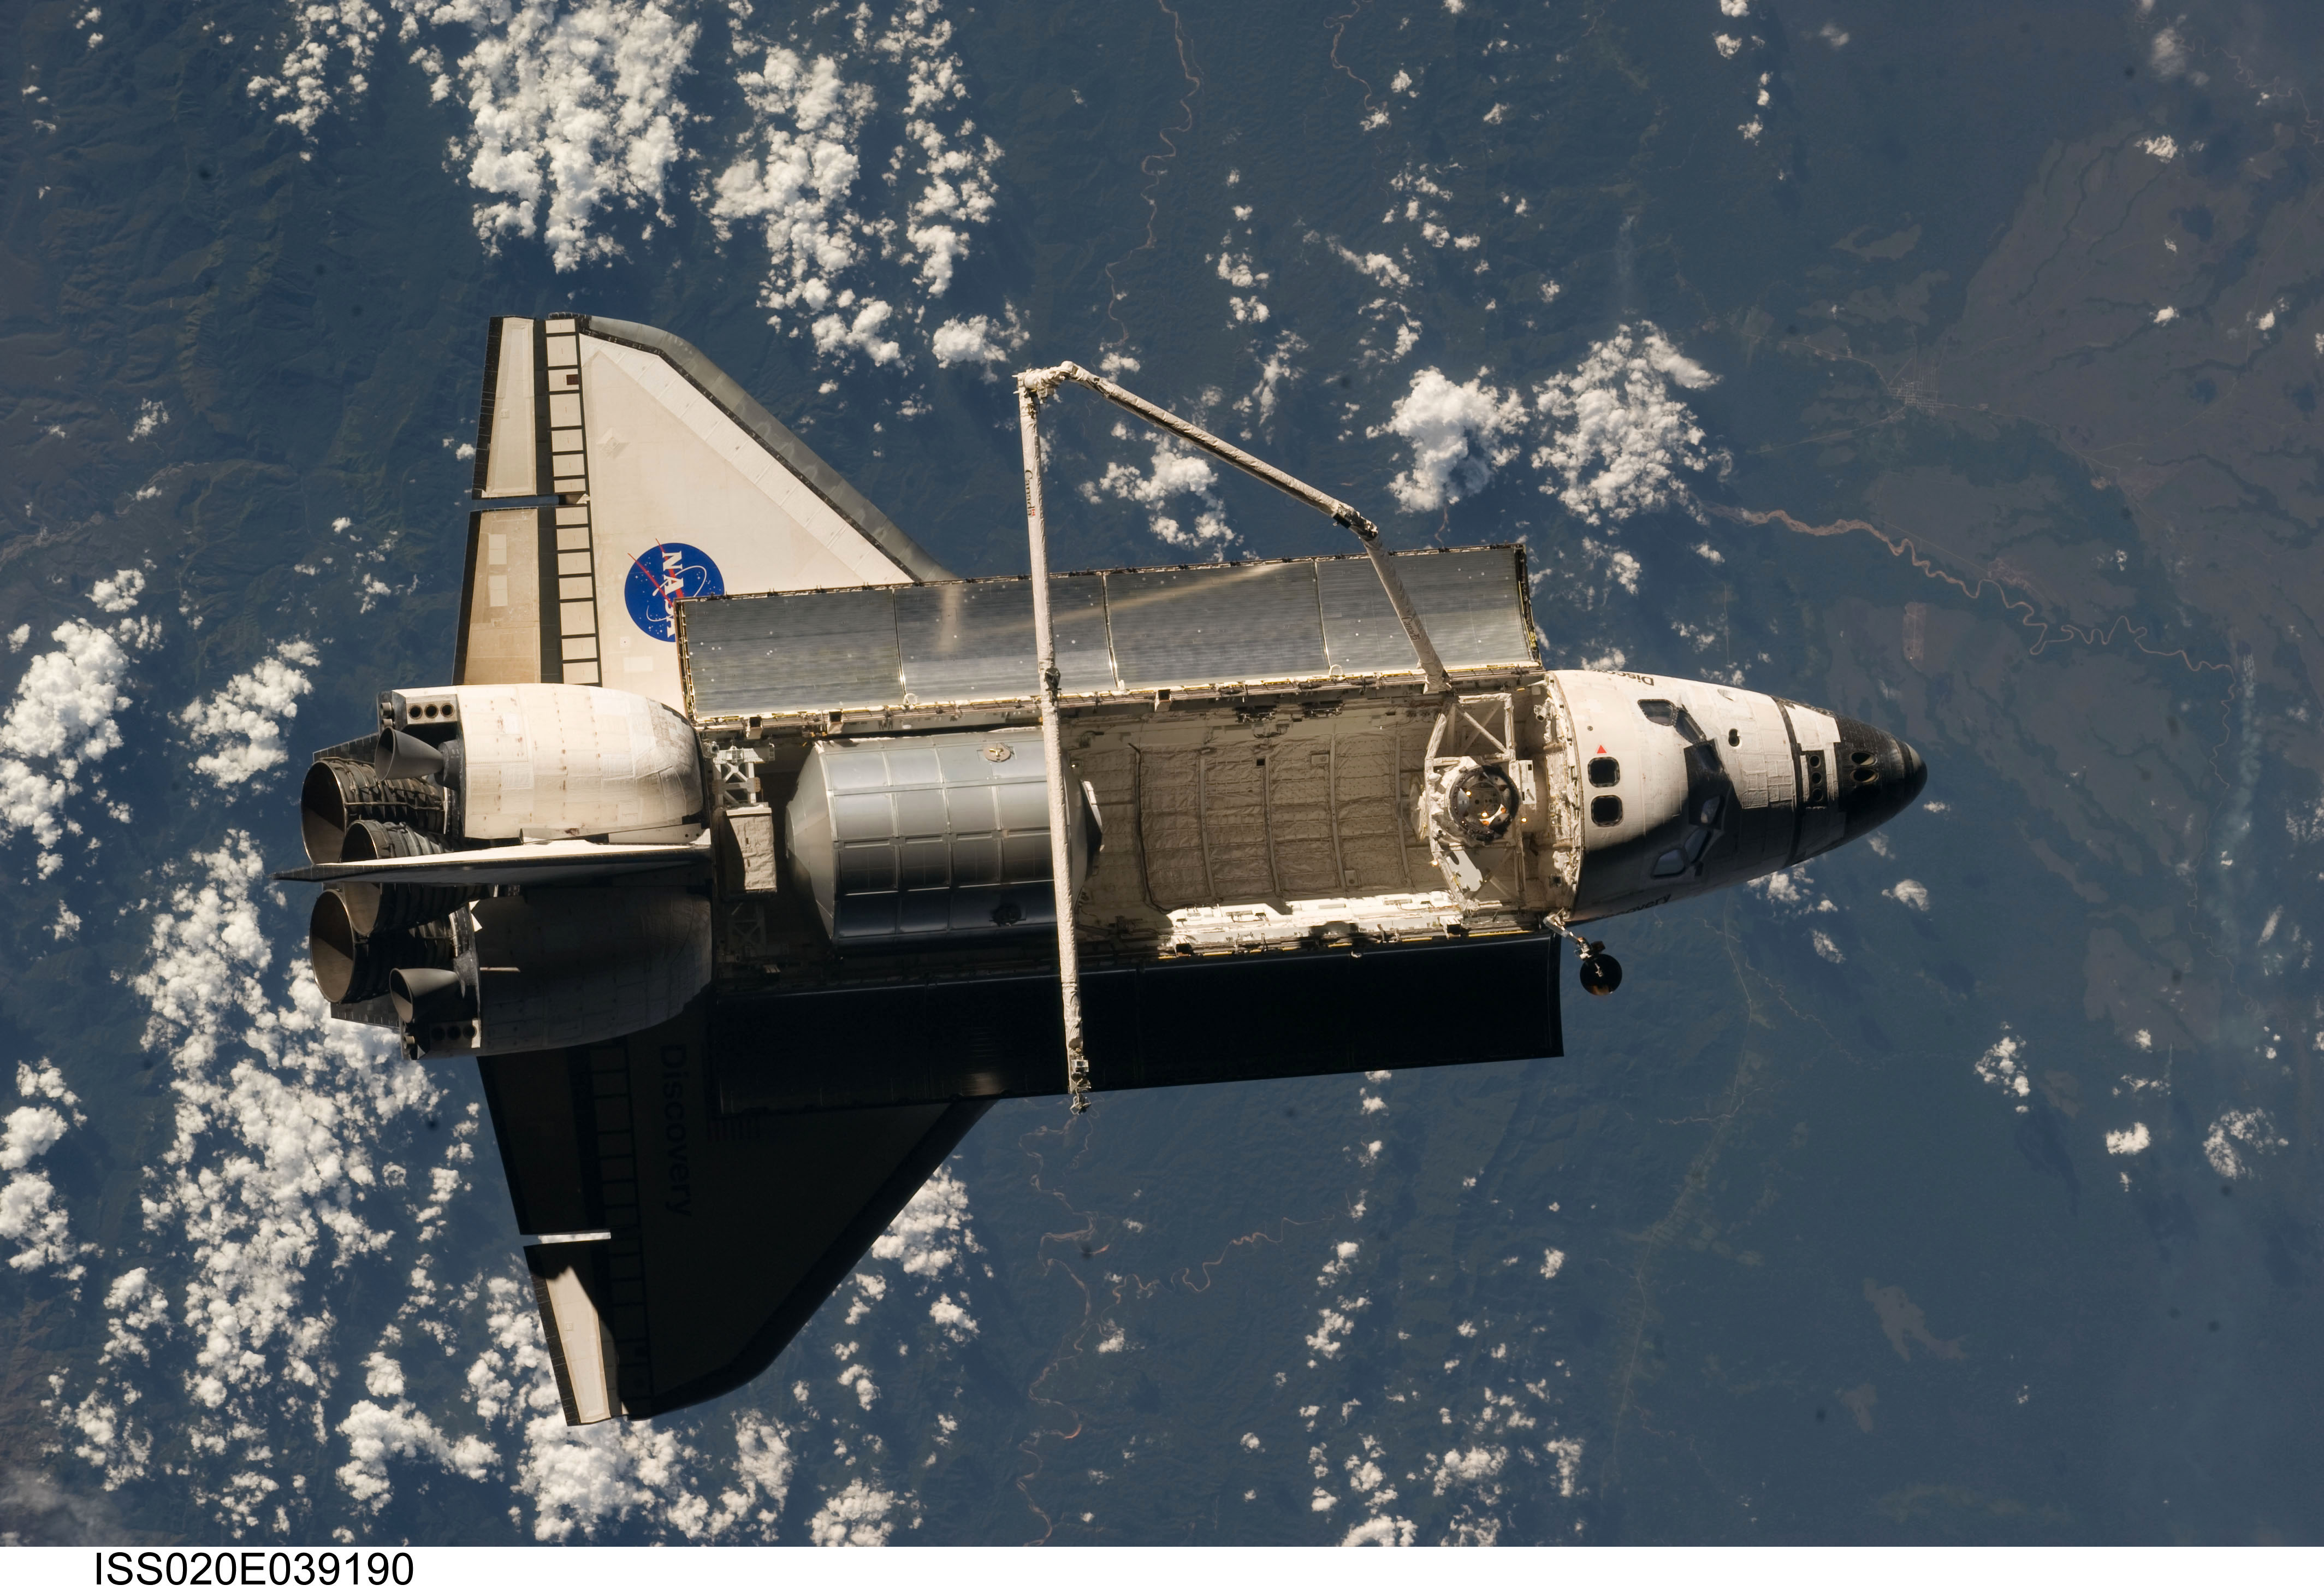 Space in Images - 2009 - 09 - Space Shuttle Discovery during the STS ...